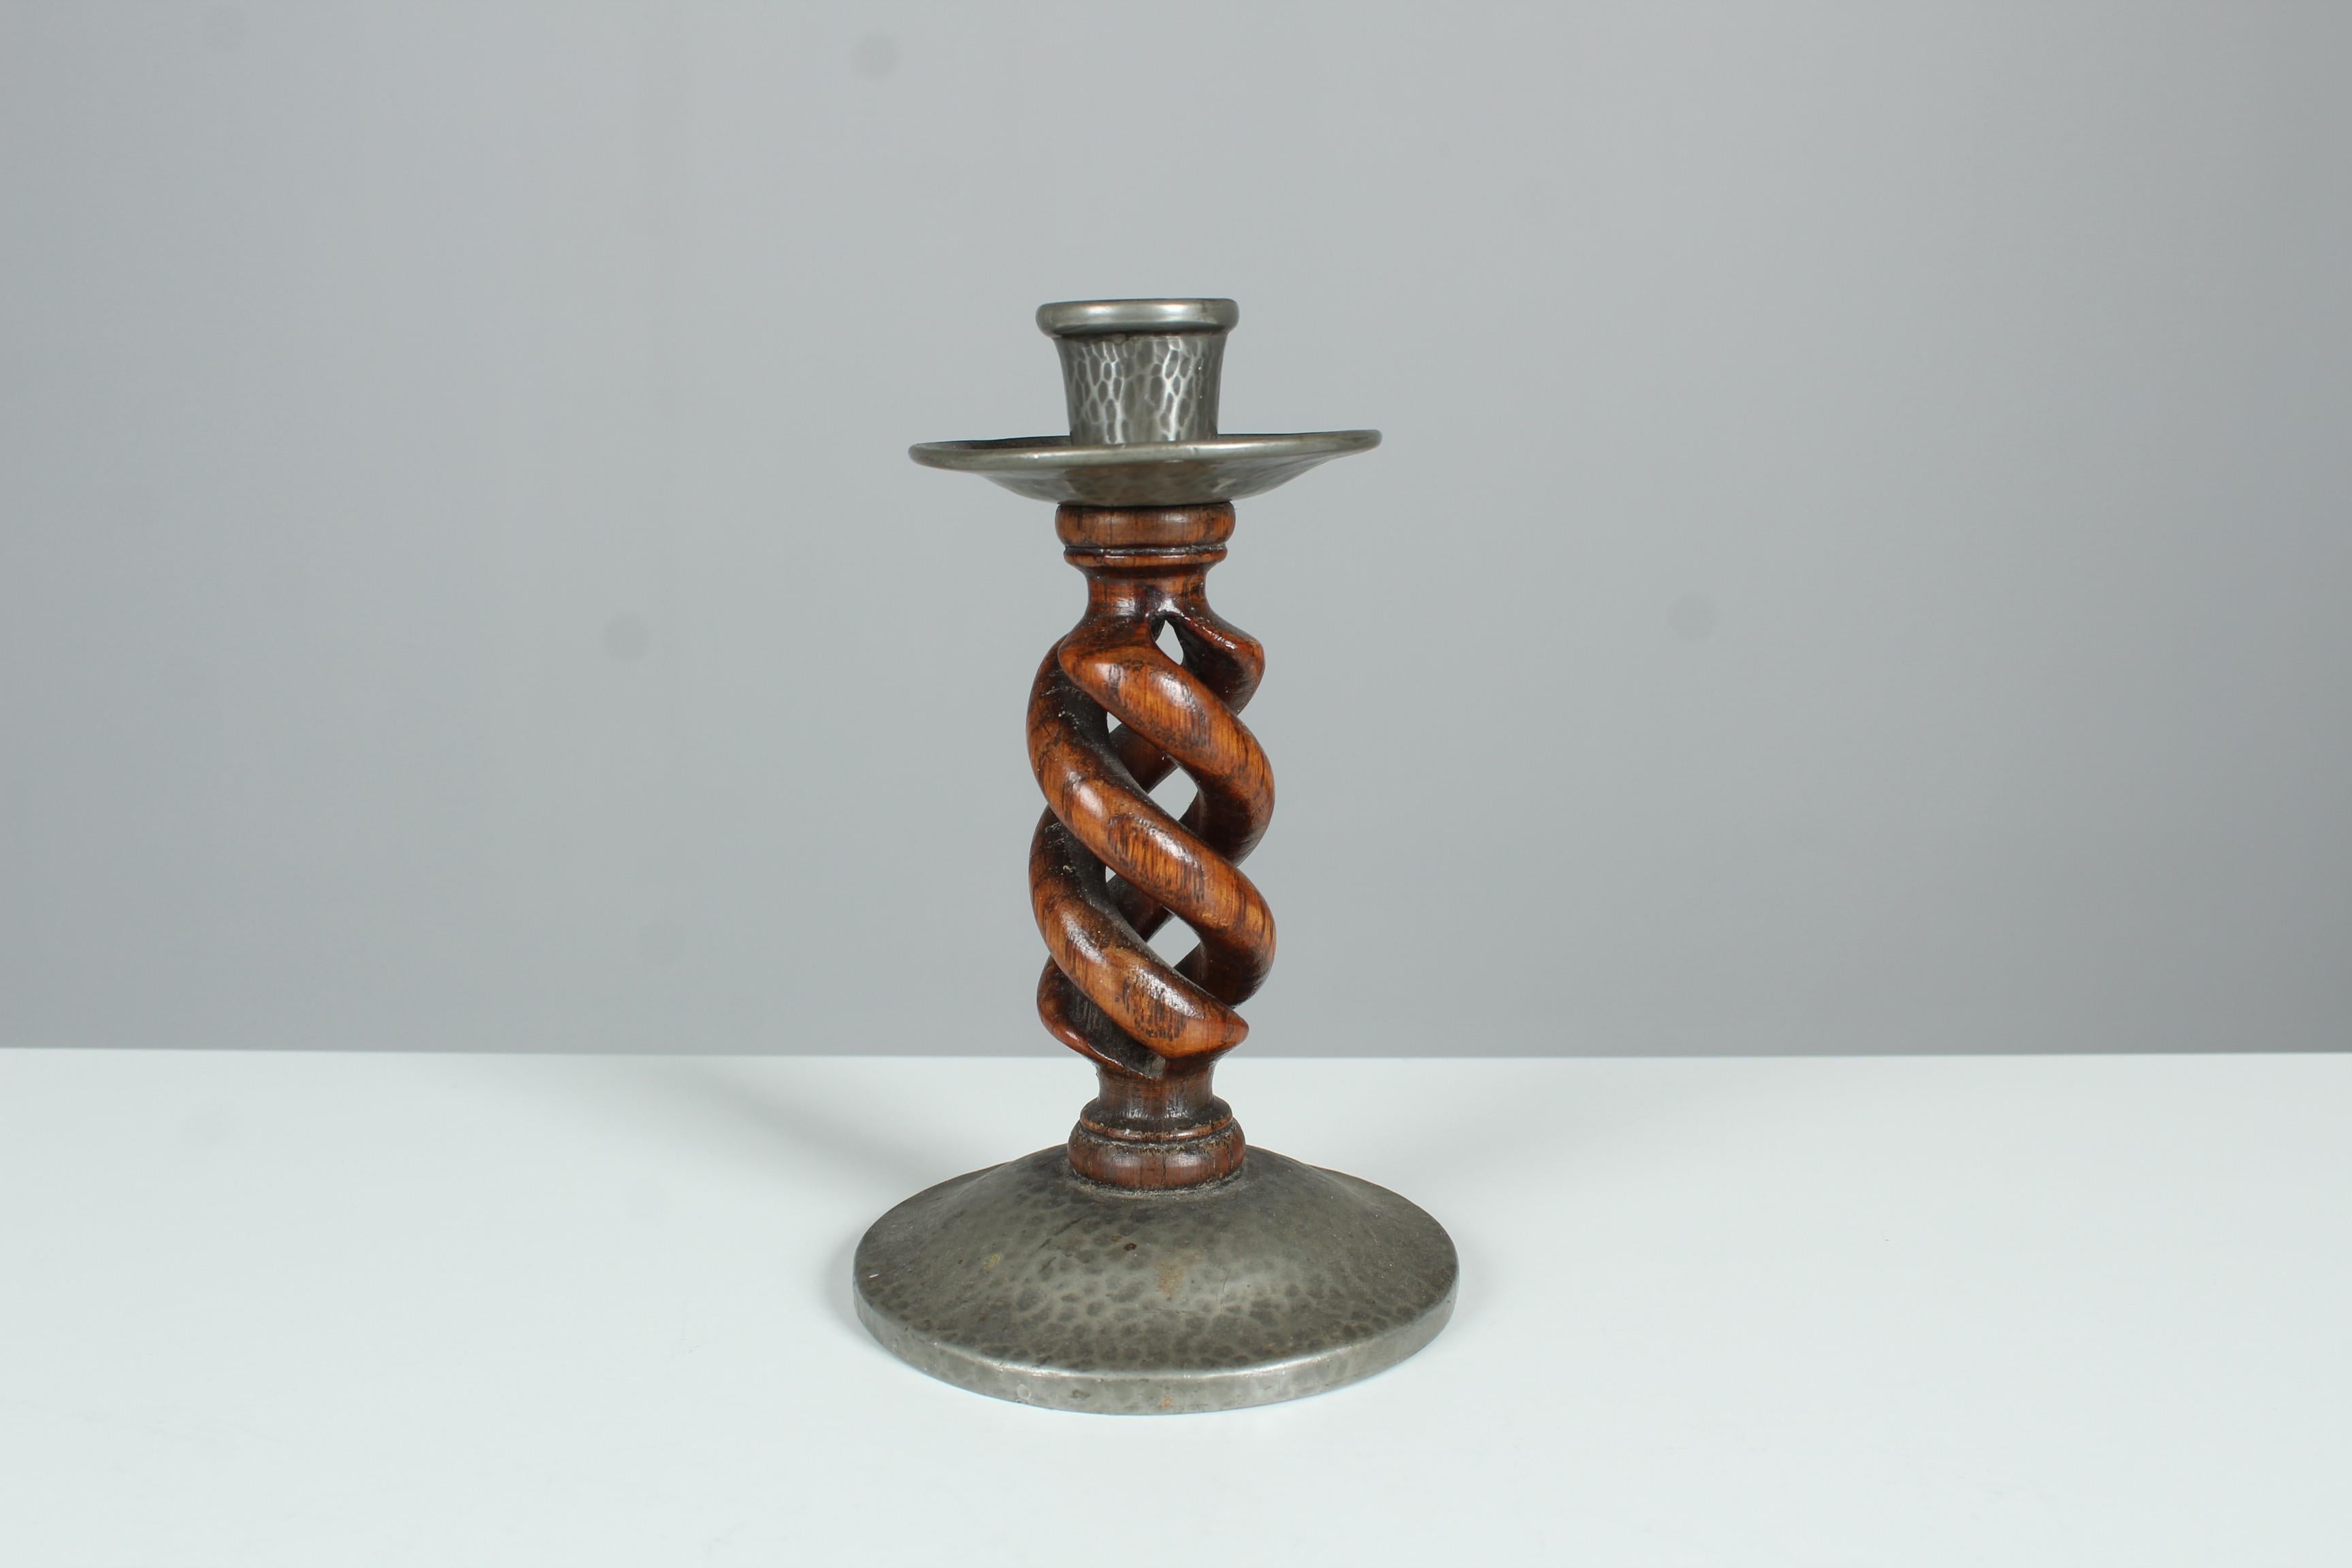 Beautiful antique candlestick, made of pewter and english oak.
Stamped at the bottom 